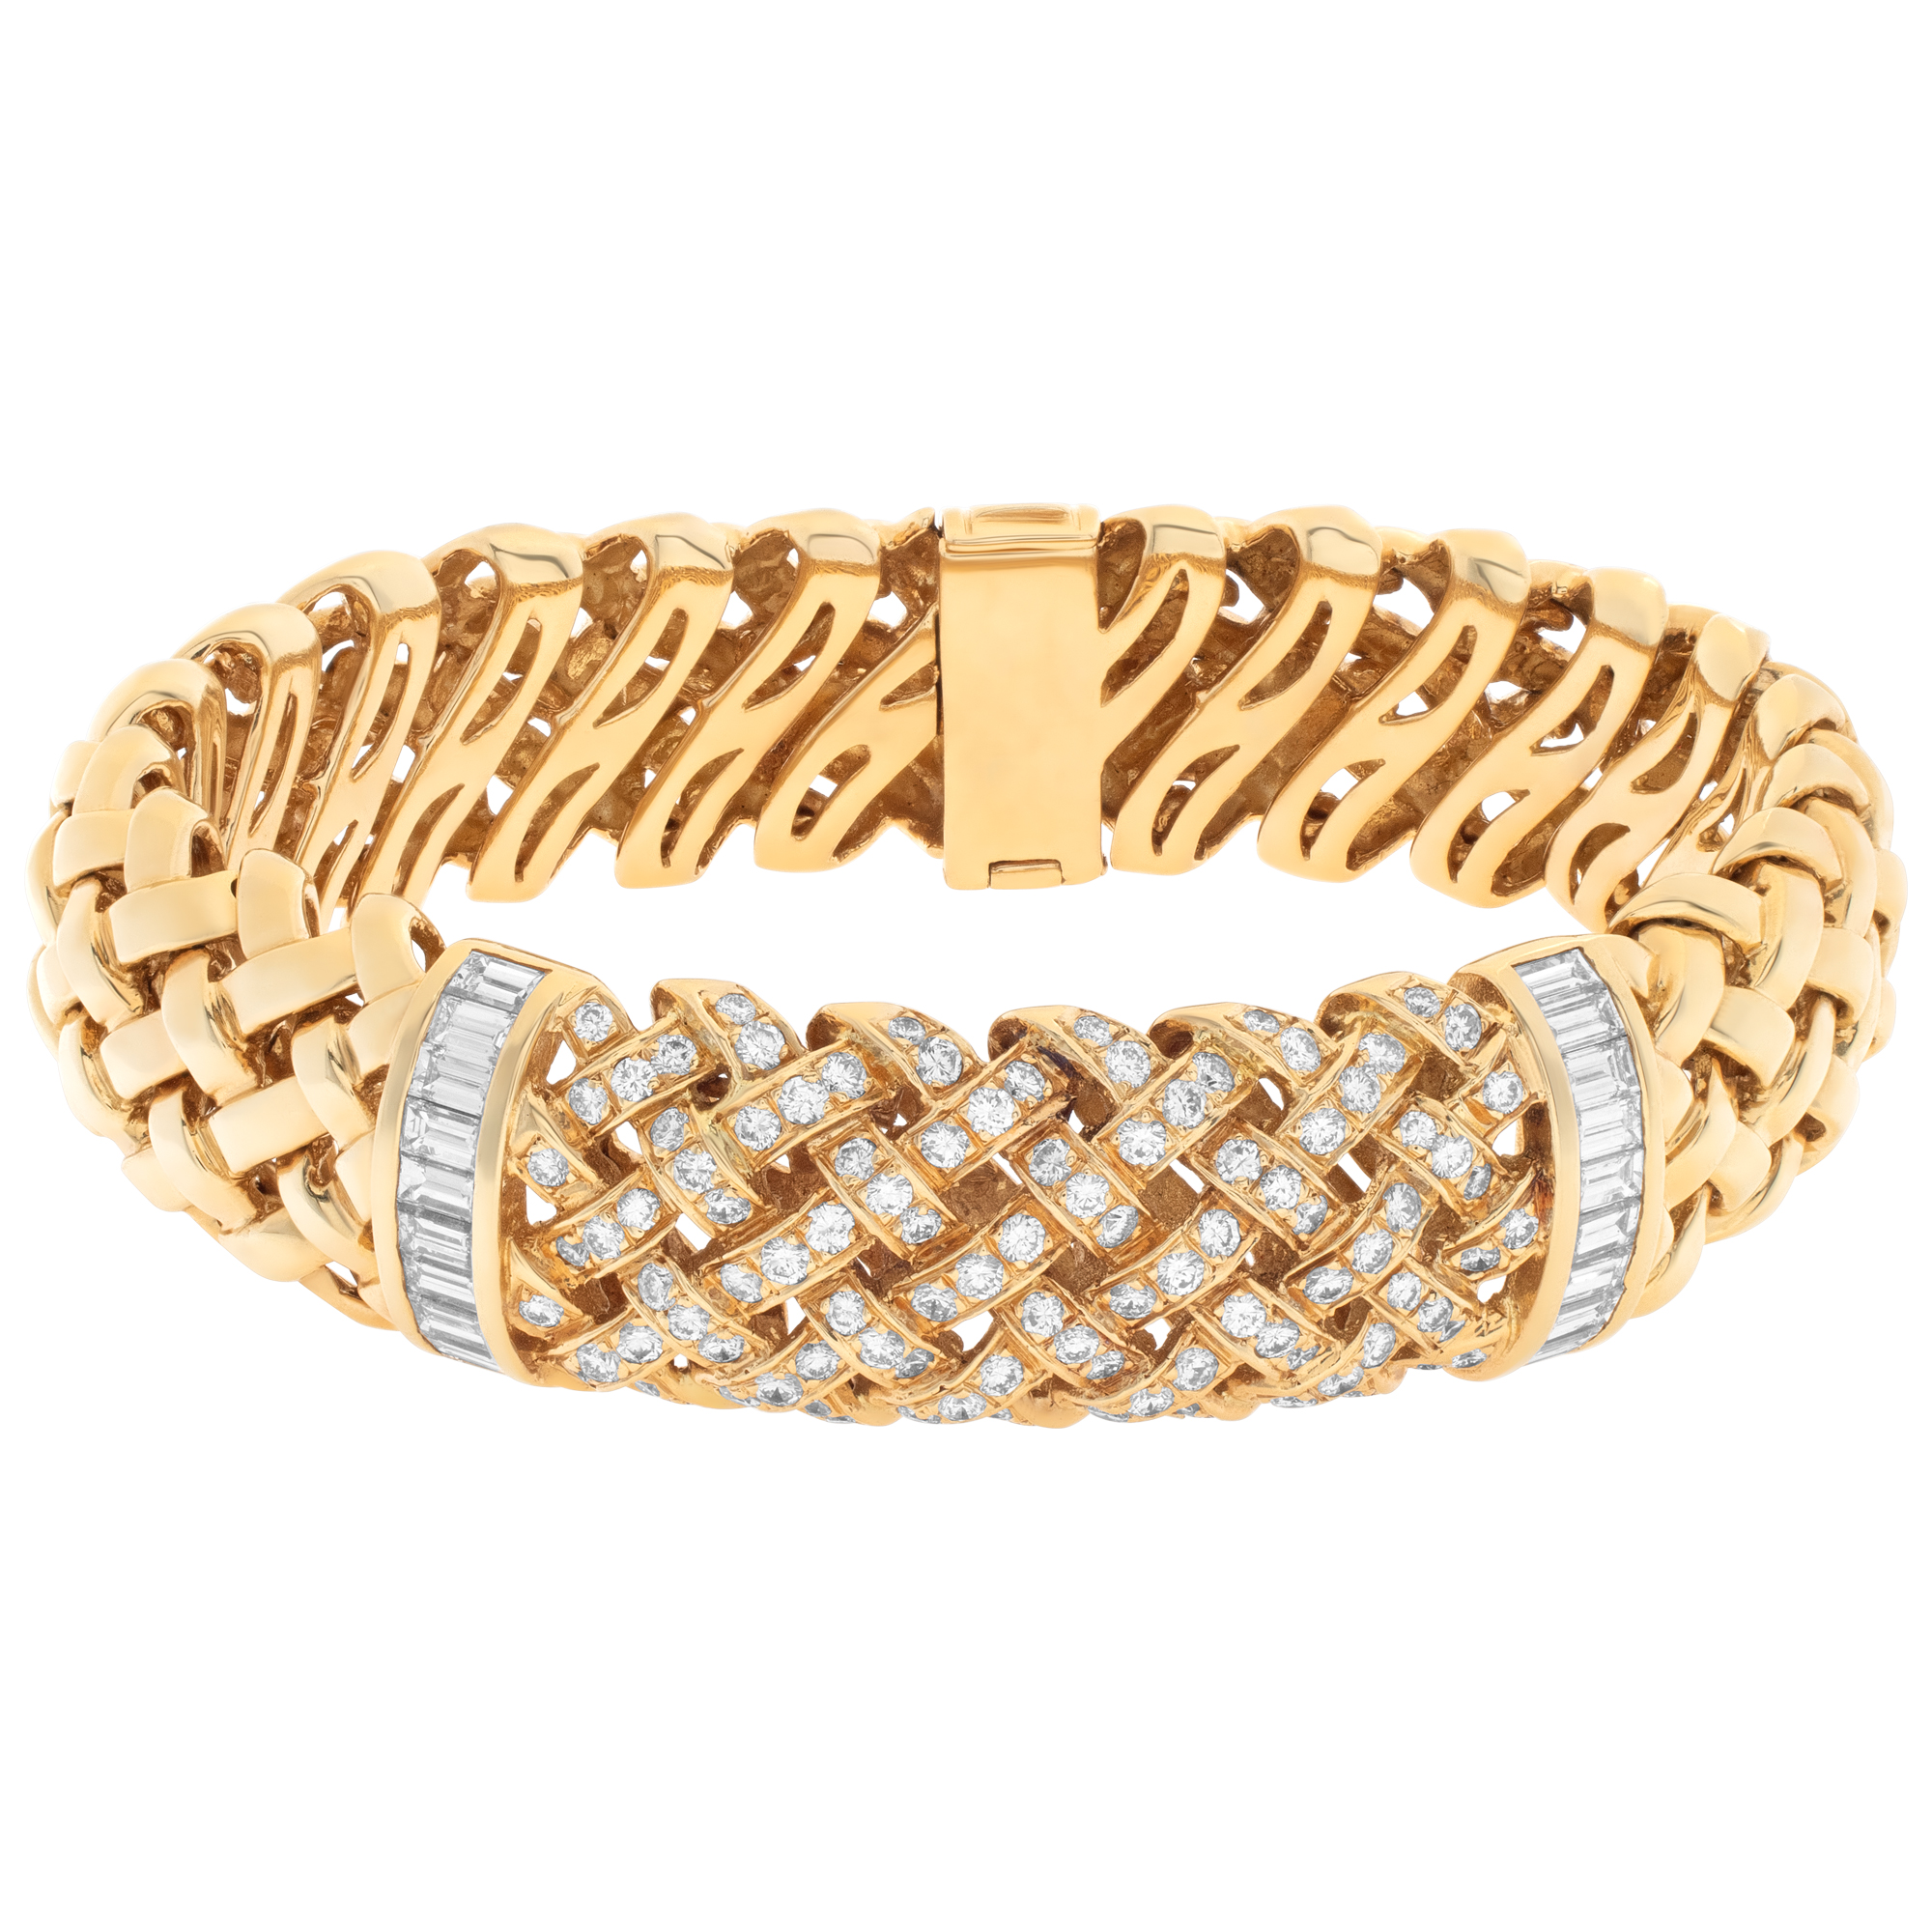 Tiffanny & Co. VANNERIE Collection bracelet in 18K yellow gold